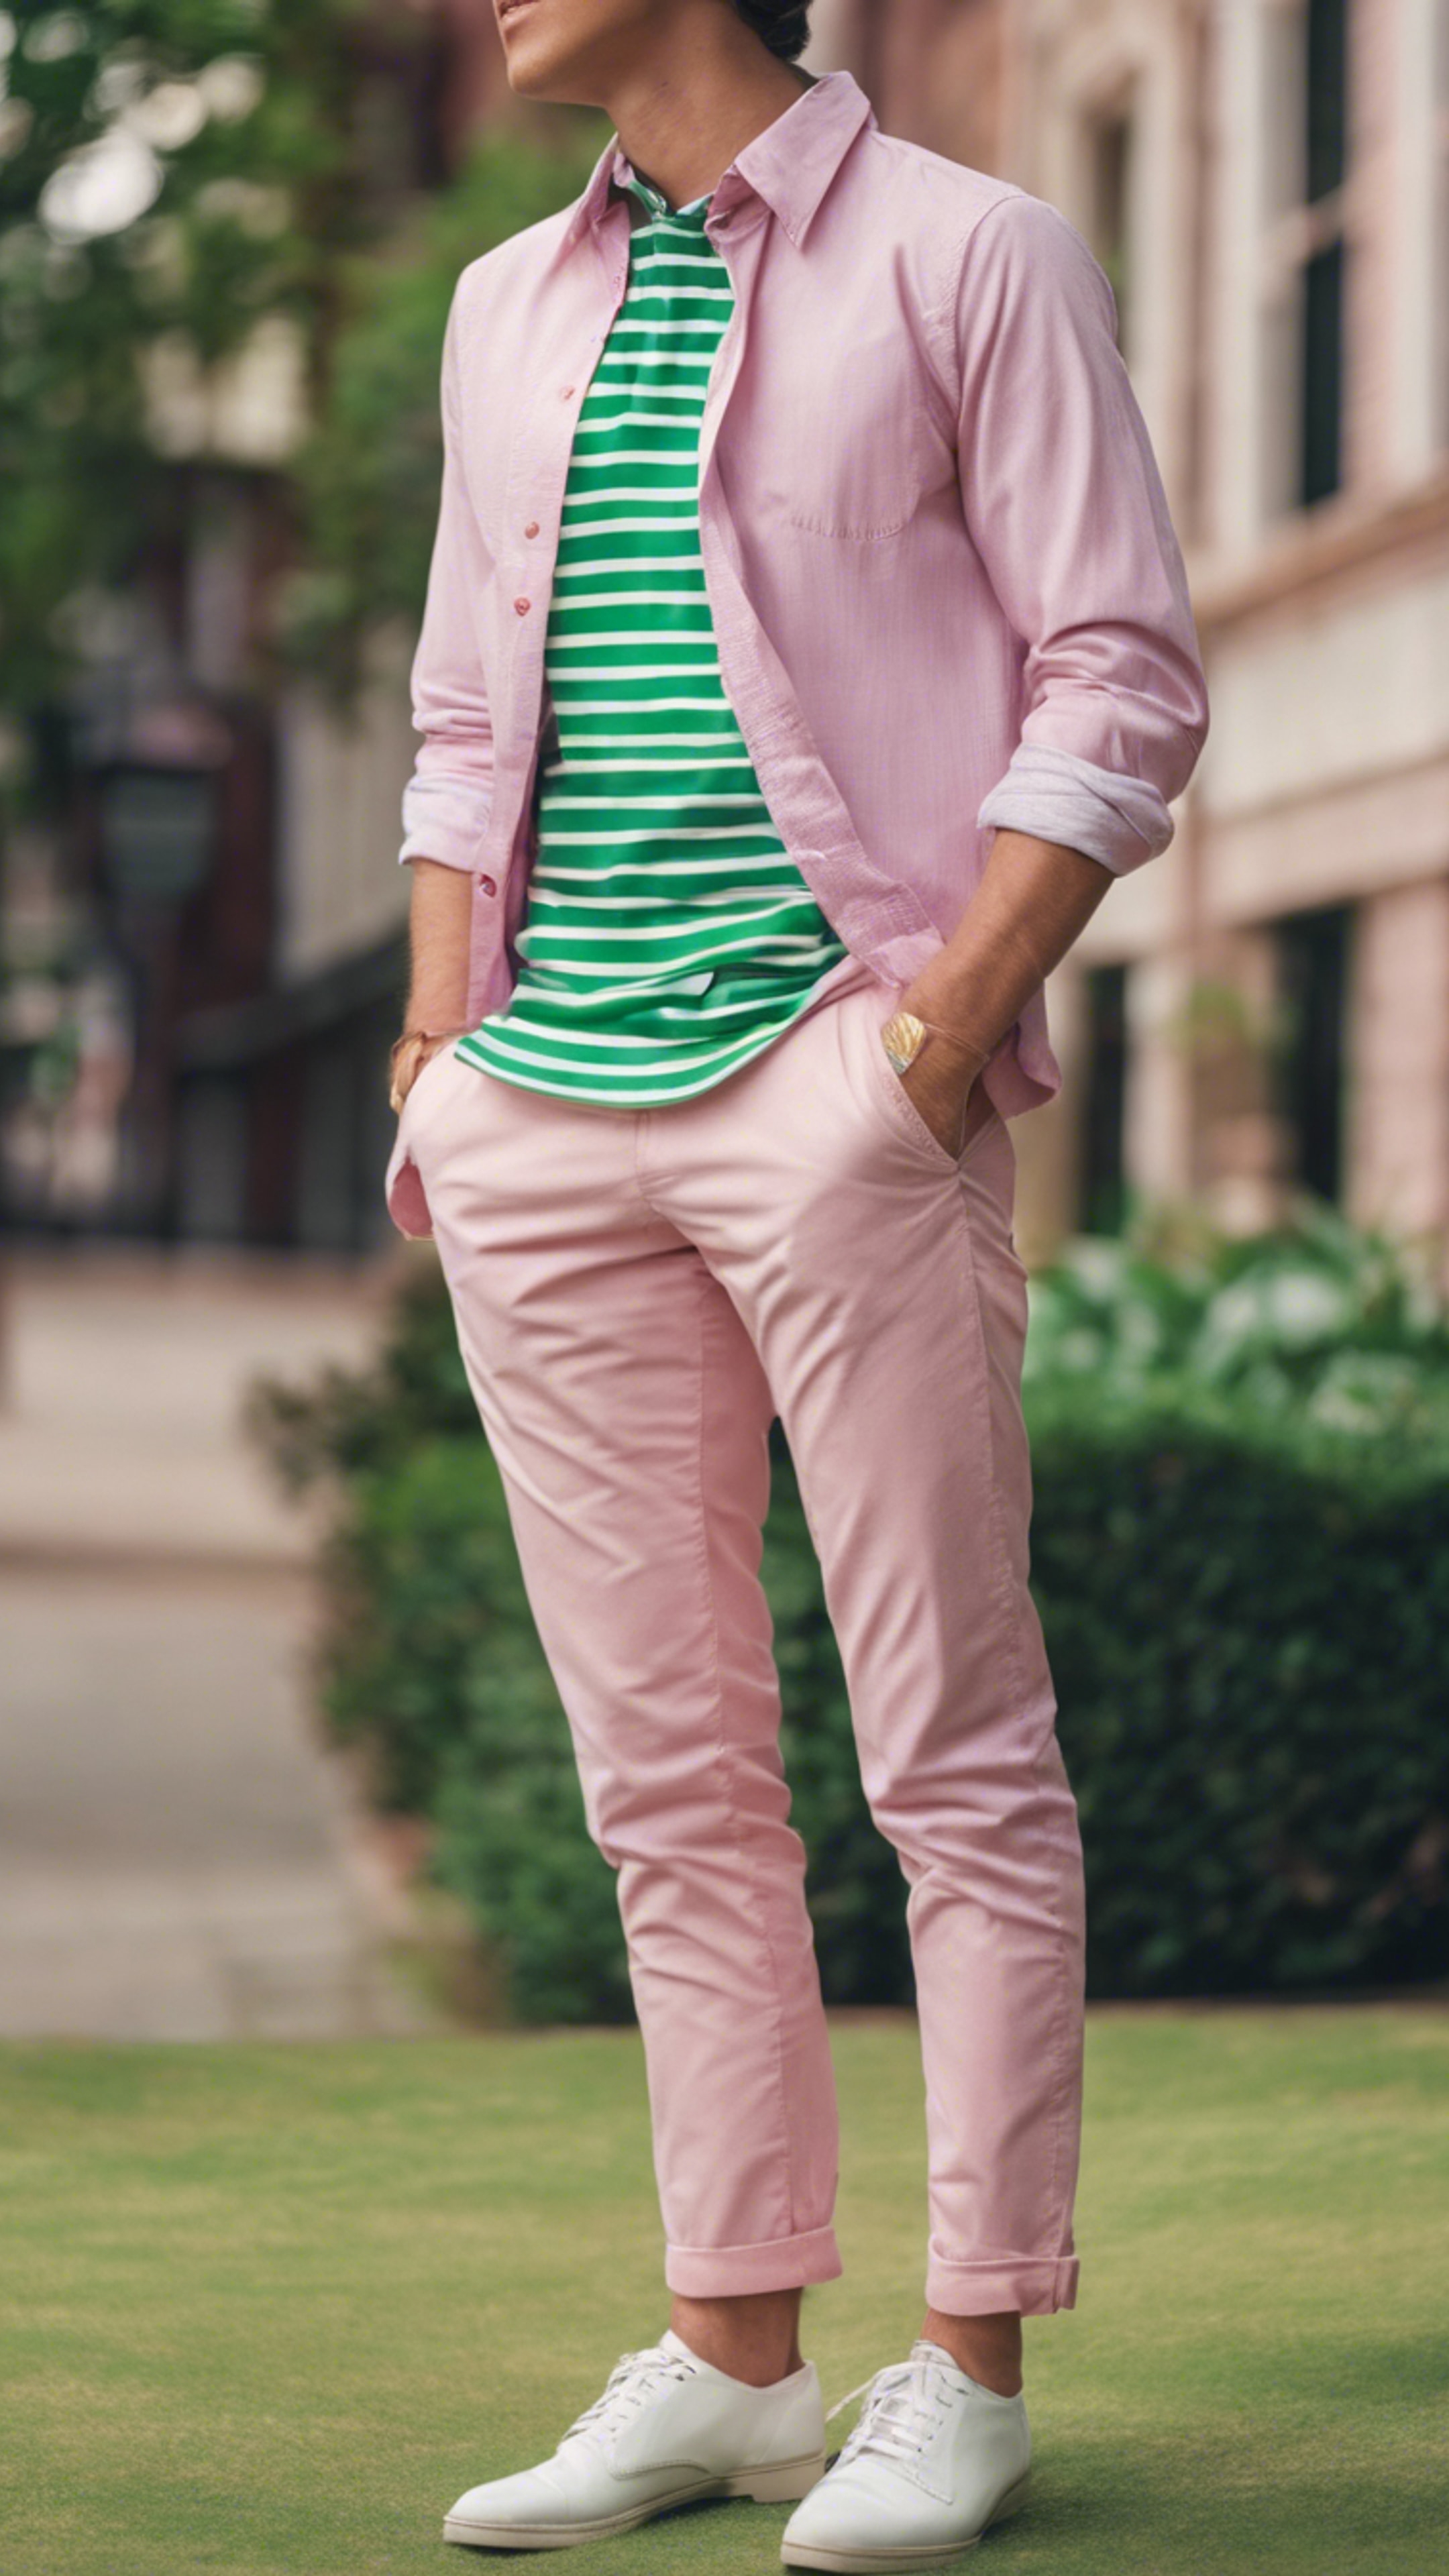 A classic preppy outfit in pink chinos with a green striped Oxford shirt. Тапет[7b2809c9502f40299443]